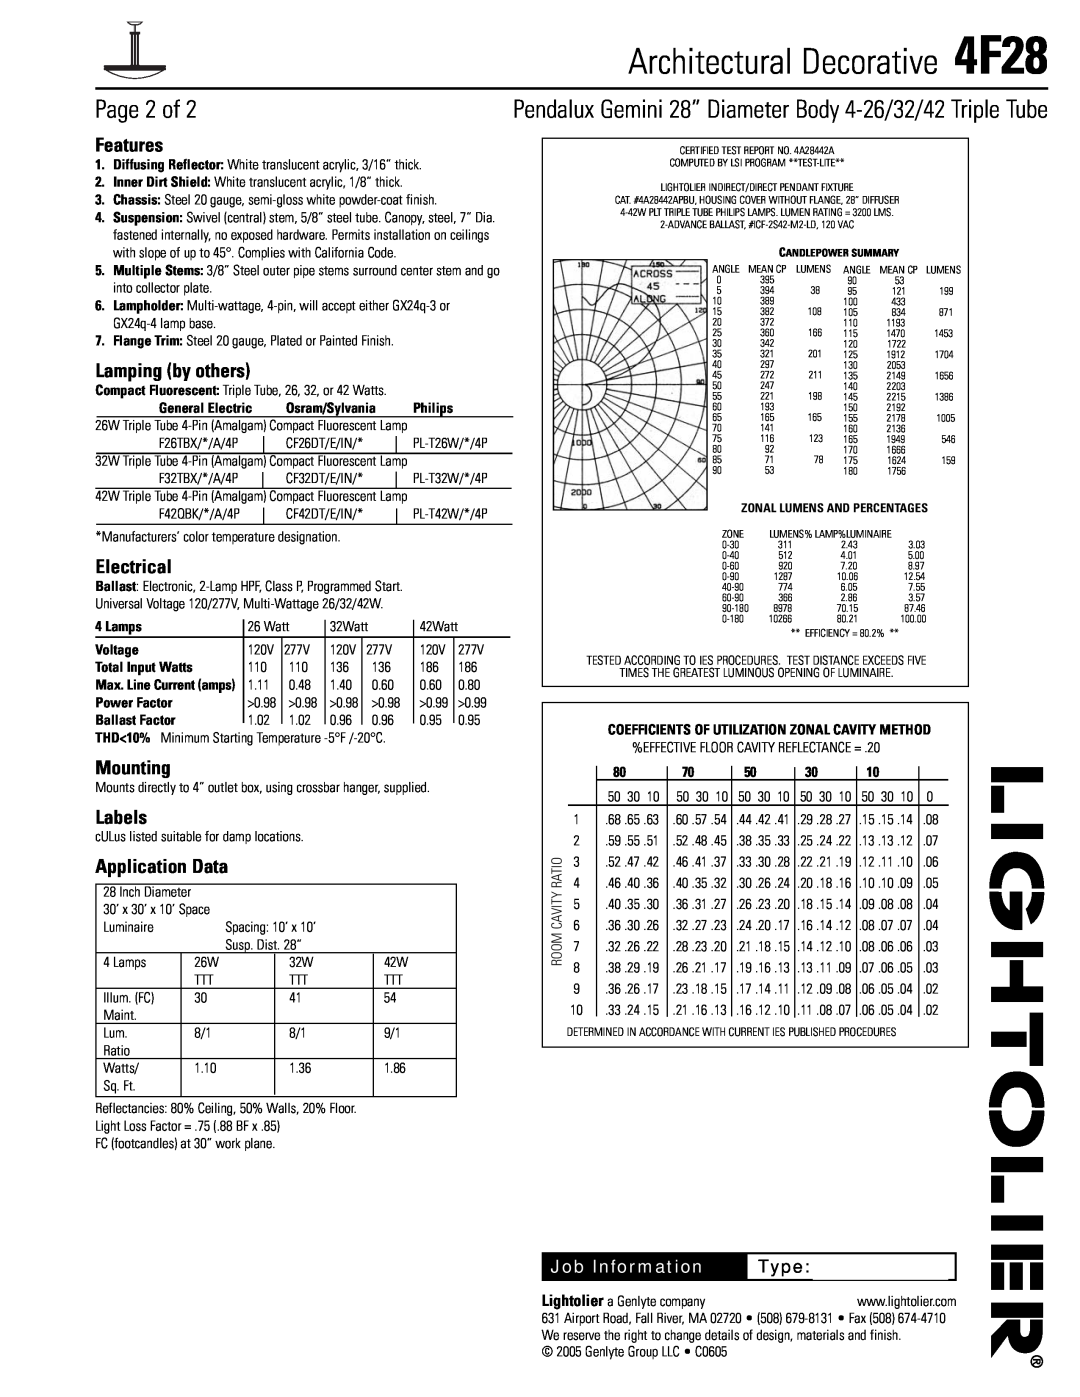 Lightolier 4F28 specifications Page 2 of, Features, Lamping by others, Electrical, Mounting, Labels, Application Data, Type 